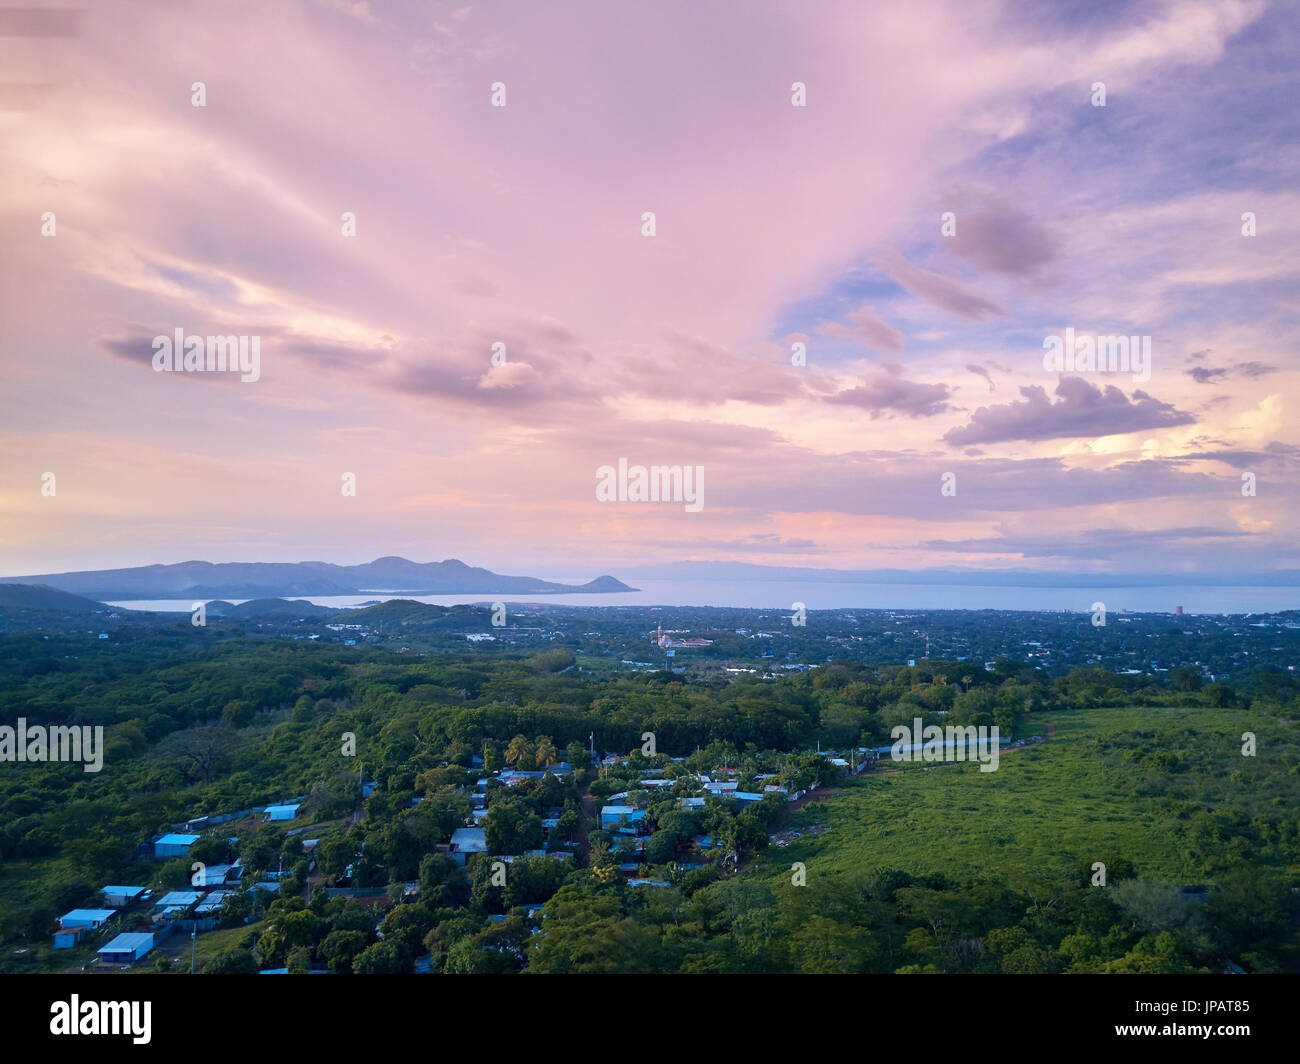 Pink sky over managua city landscape at dusk time aerial view Stock Photo